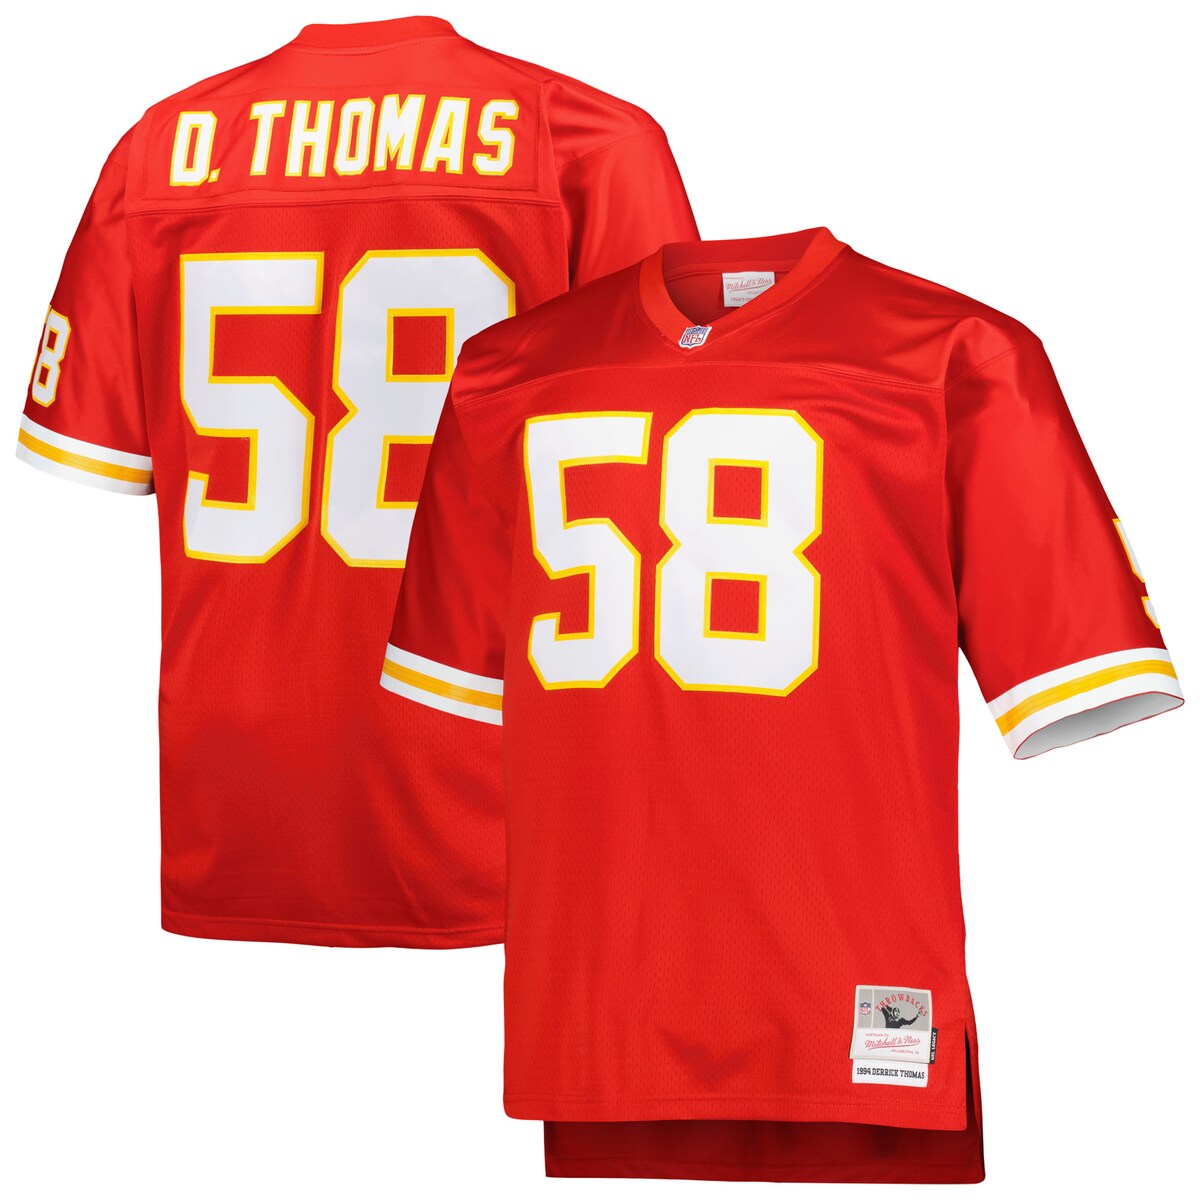 When you're gearing up for the gridiron action, celebrate one of the greatest players in the storied history of your franchise with this Derrick Thomas Kansas City Chiefs Retired Player jersey from Mitchell & Ness. The bold graphics make it clear where your allegiance lies on Sundays. The mesh fabric adds enhanced breathability for a comfortable game day experience.Stitched jock tag at bottom left hemOfficially licensedMachine wash, tumble dry lowV-neckMaterial: 100% PolyesterDrop tail hem with side splitsImportedMesh fabricBrand: Mitchell & NessStitched tackle twill letters and numbersBack neck tapingStitched fabric applique with player year and nameReplica Jersey